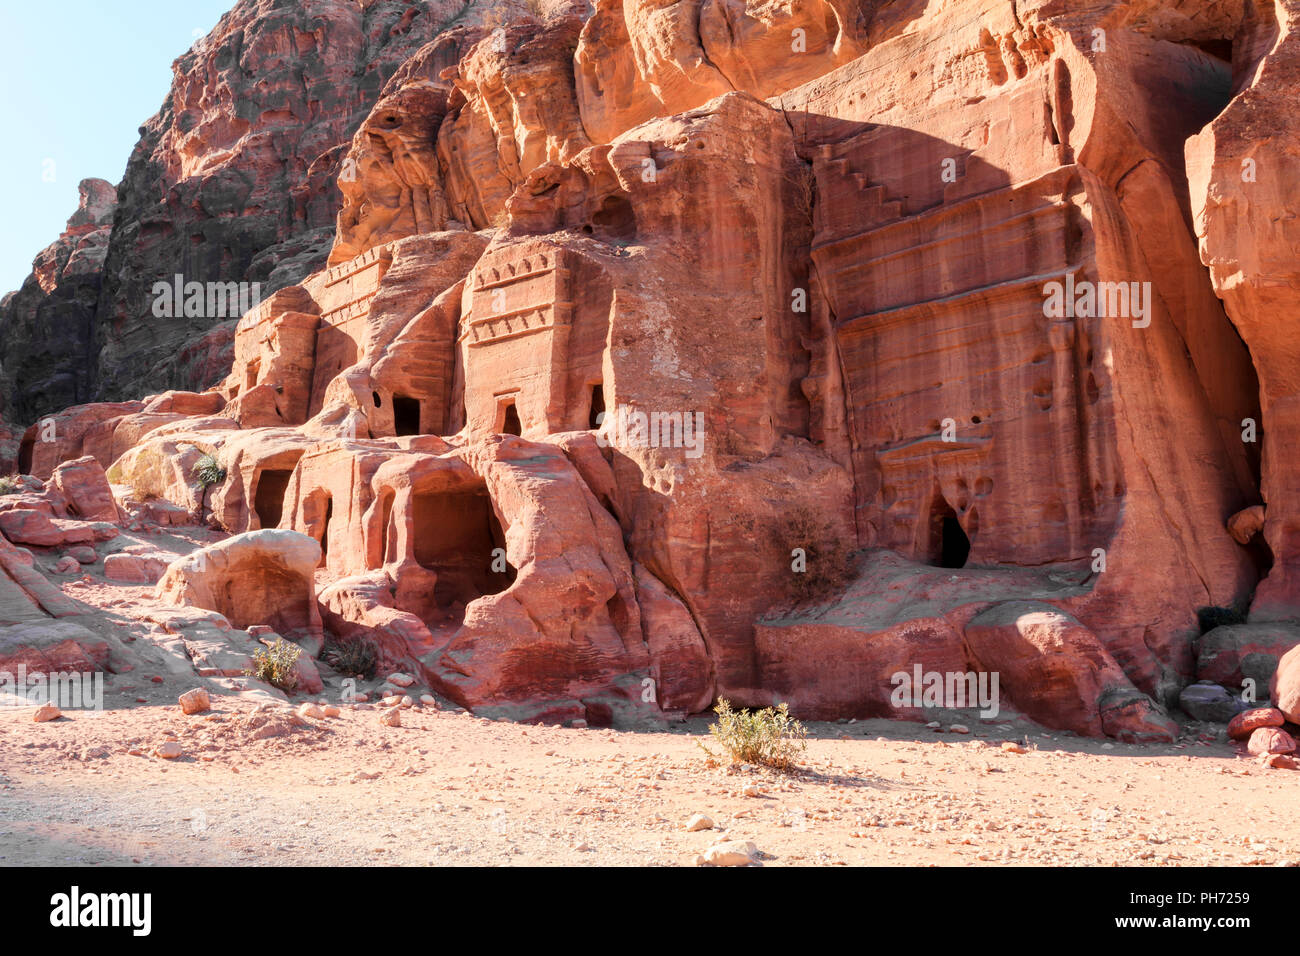 Tombs in the lost city of petra Stock Photo